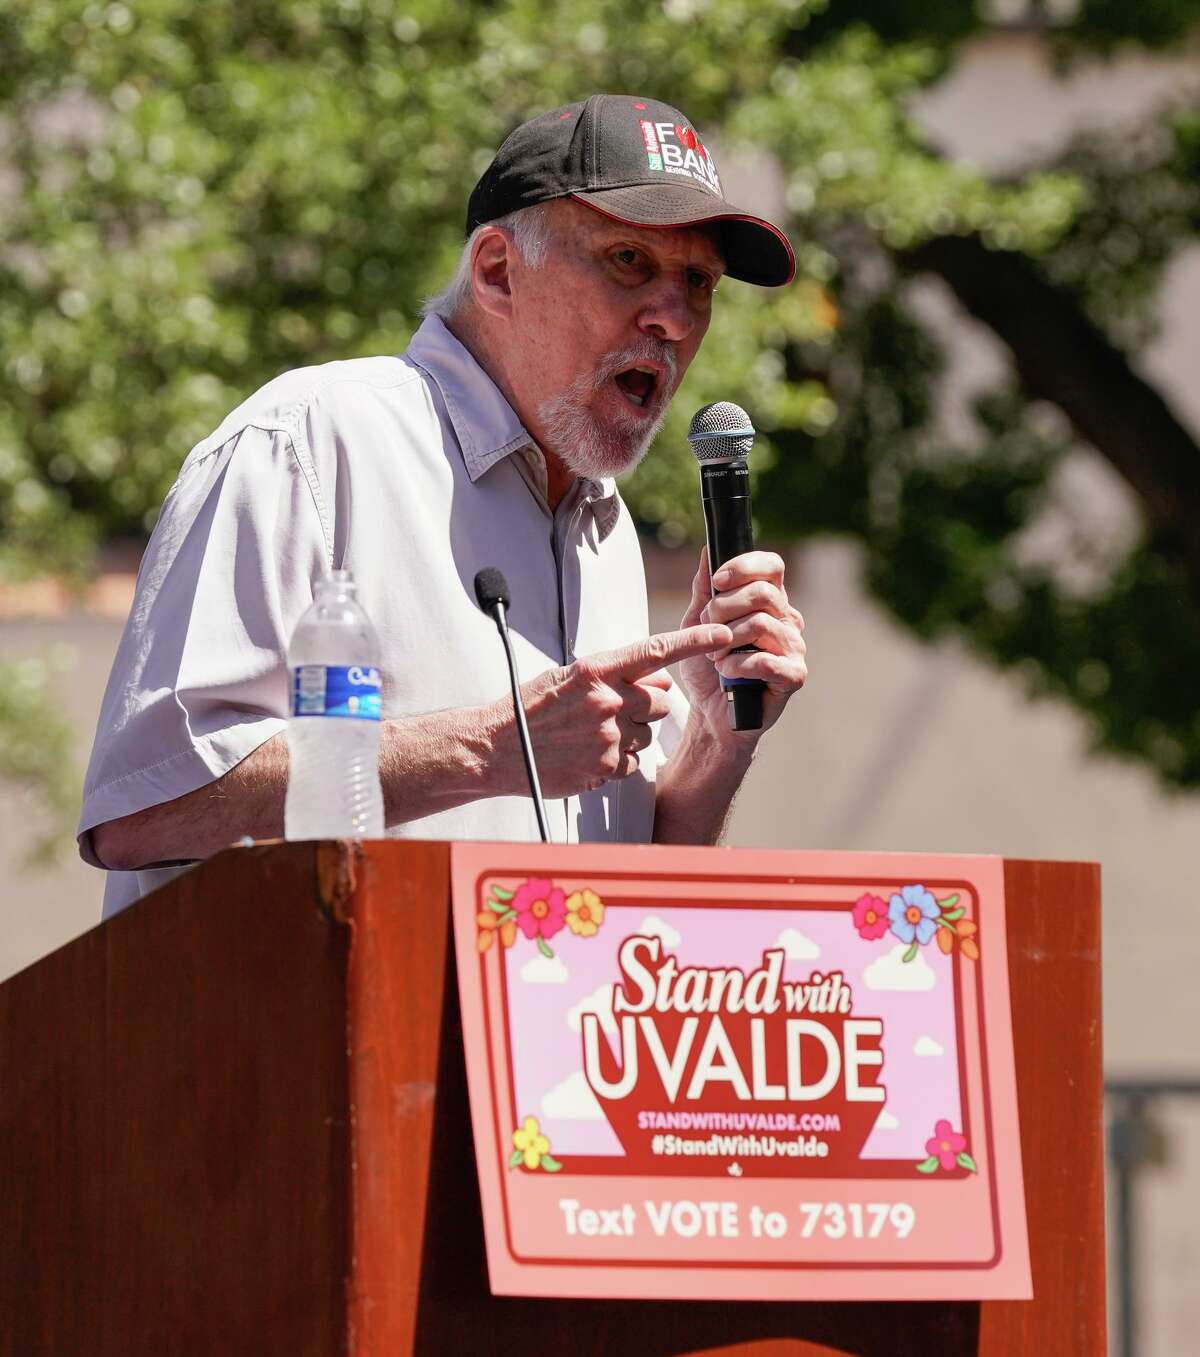 Spurs Coach Gregg Popovich speaks during a “Stand with Uvalde” call to action rally Saturday morning in Travis Park.